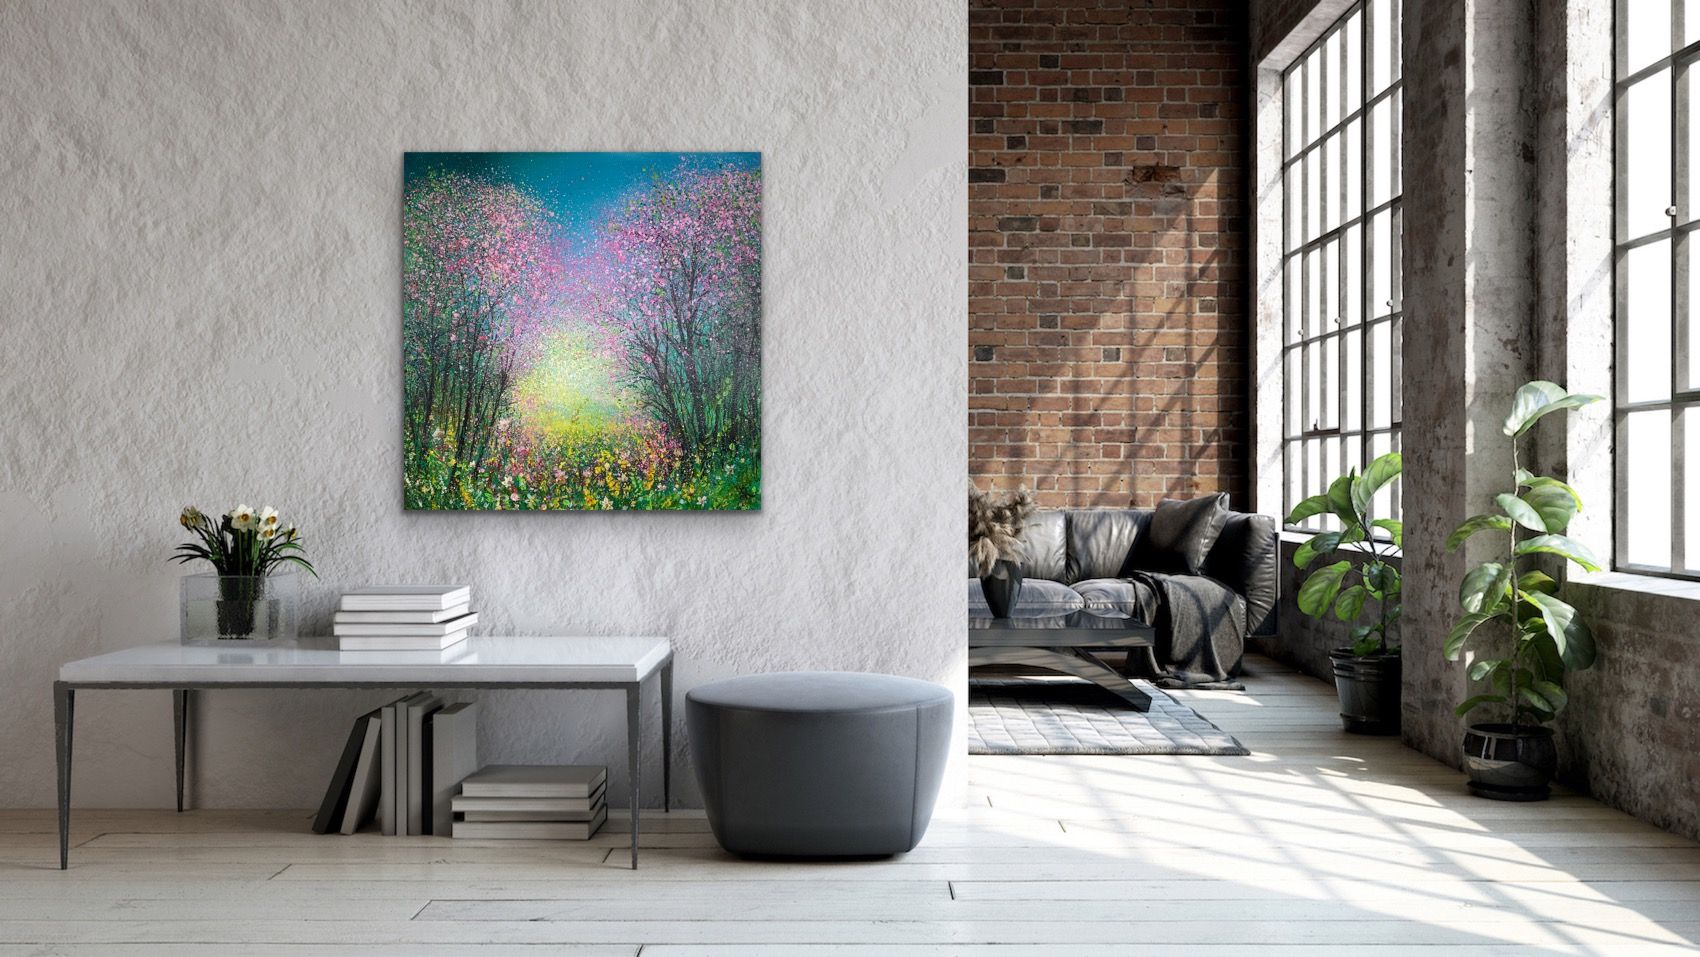 Cherry Blossom and Spring Flora by Jan Rogers - Secondary Image